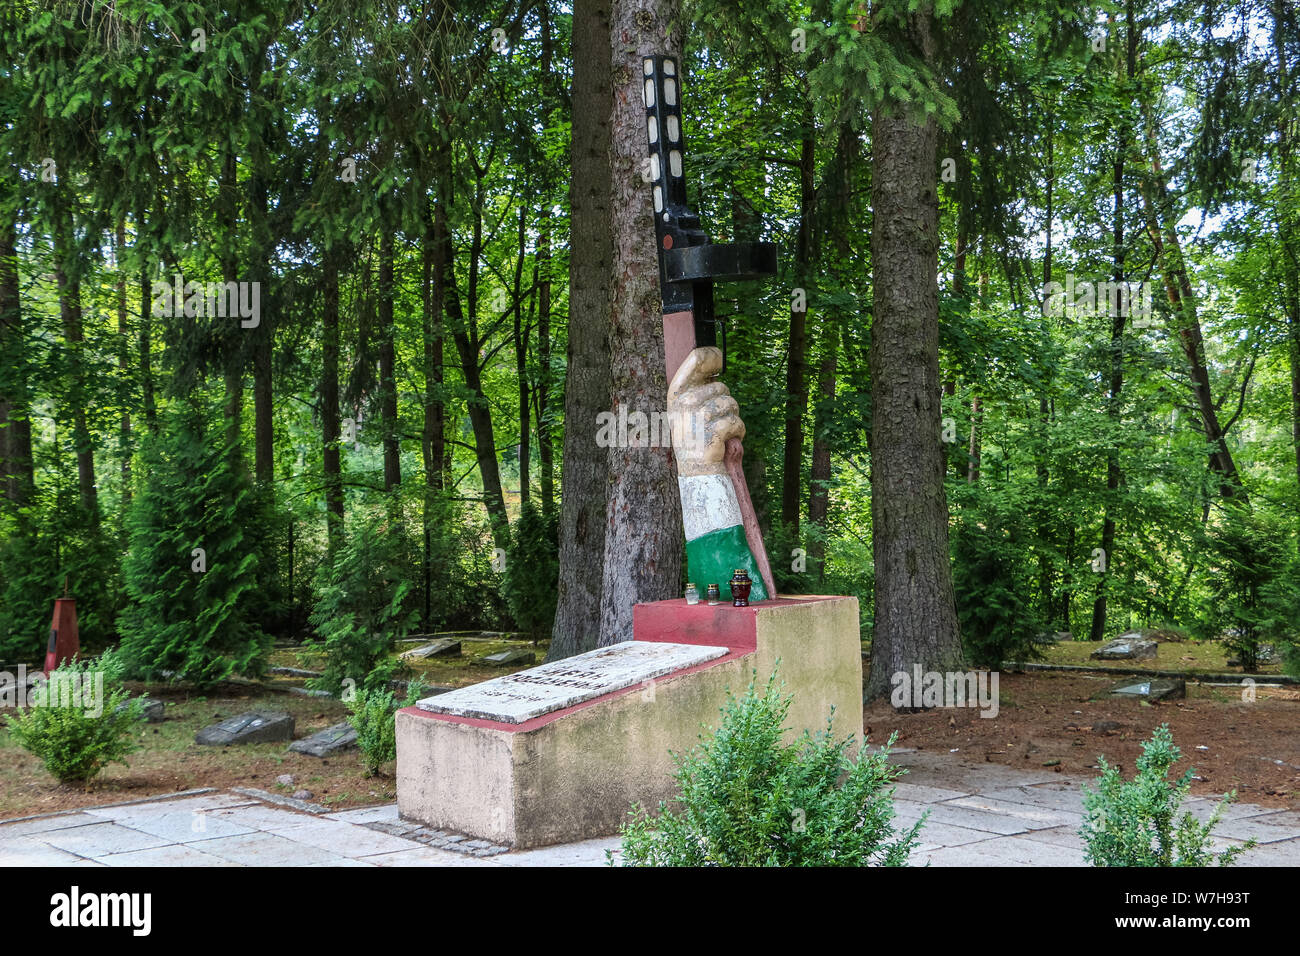 Borne Sulinowo, Poland. 3rd, August  2019 Monument of the Ivan Poddubny - A hand with a PPSh-41 Russian Soviet submachine gun on the North Group of Force Soviet Russian army are seen in Borne Sulinowo, Poland on 3 August 2019 Borne Sulinowo between 1945 and 1992 was a secret Soviet military base, erased from all Polish maps and it was not transferred to Polish jurisdiction until 1992. In official documents were called forest areas and remained a secret for almost 50 years. In 344 graves are buried Soviet soldiers, their families and civilian soviet army workers. © Vadim Pacajev / Alamy Live Ne Stock Photo